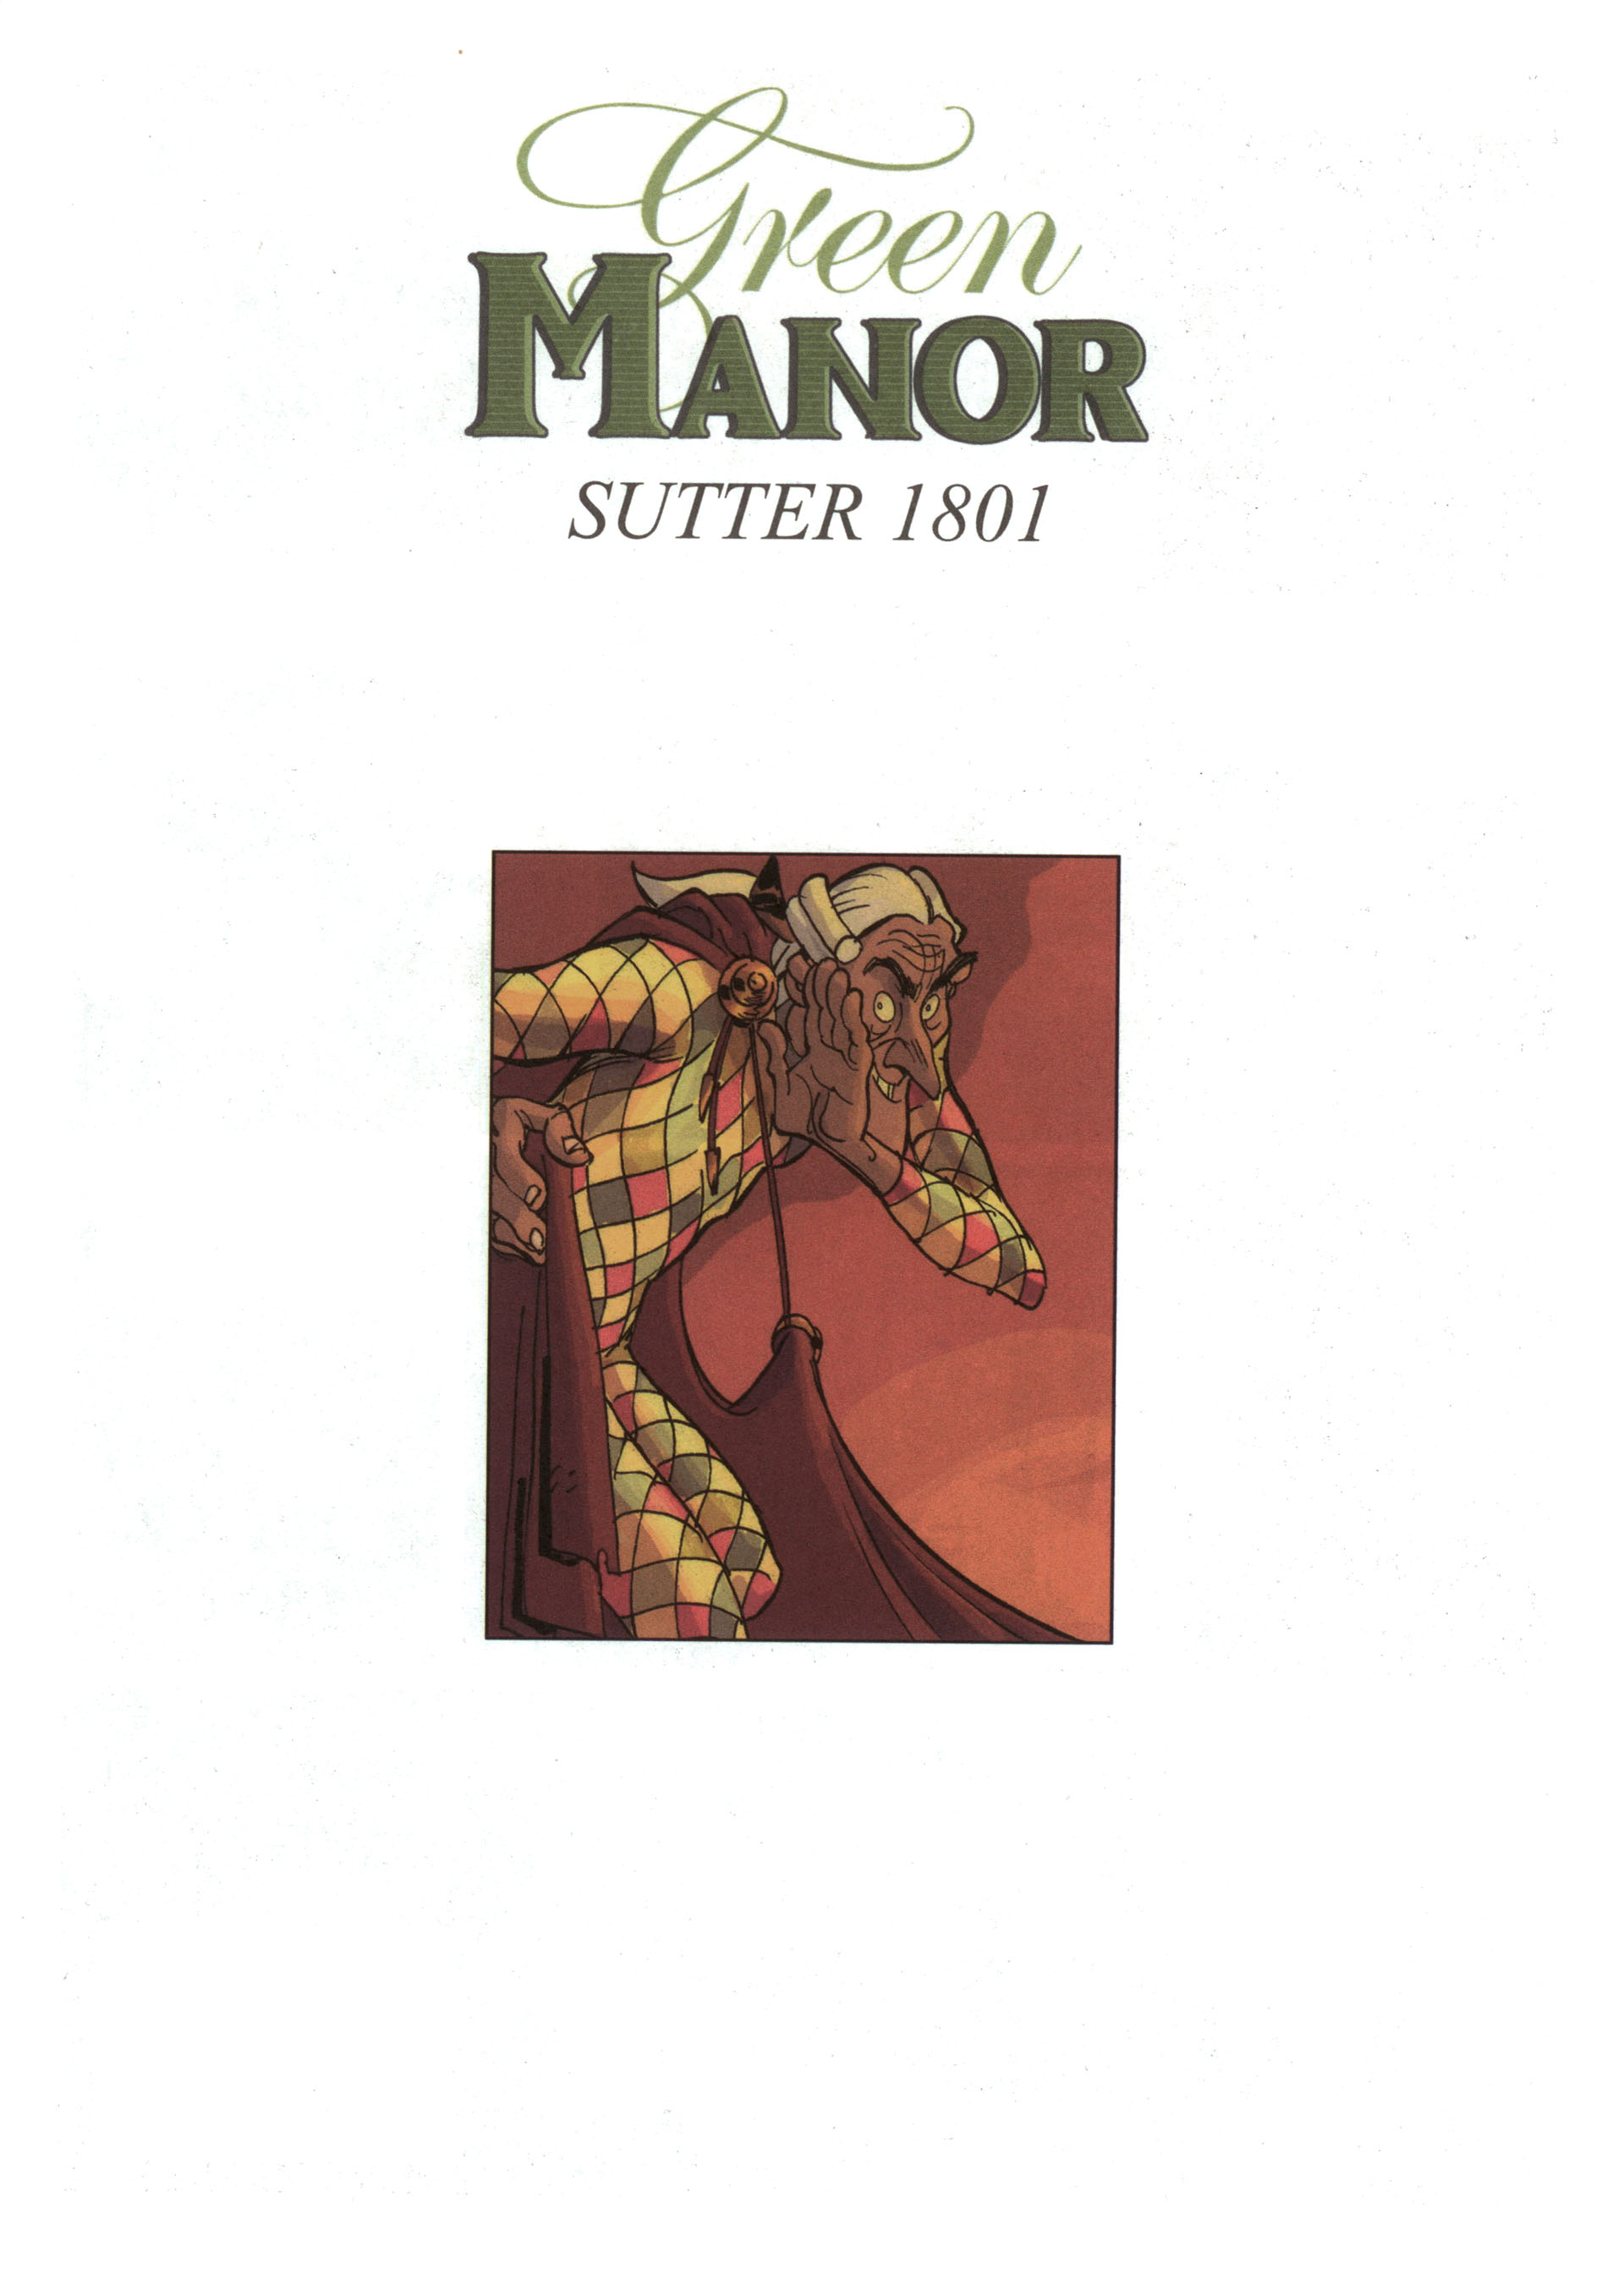 Read online Green Manor comic -  Issue #1 - 39